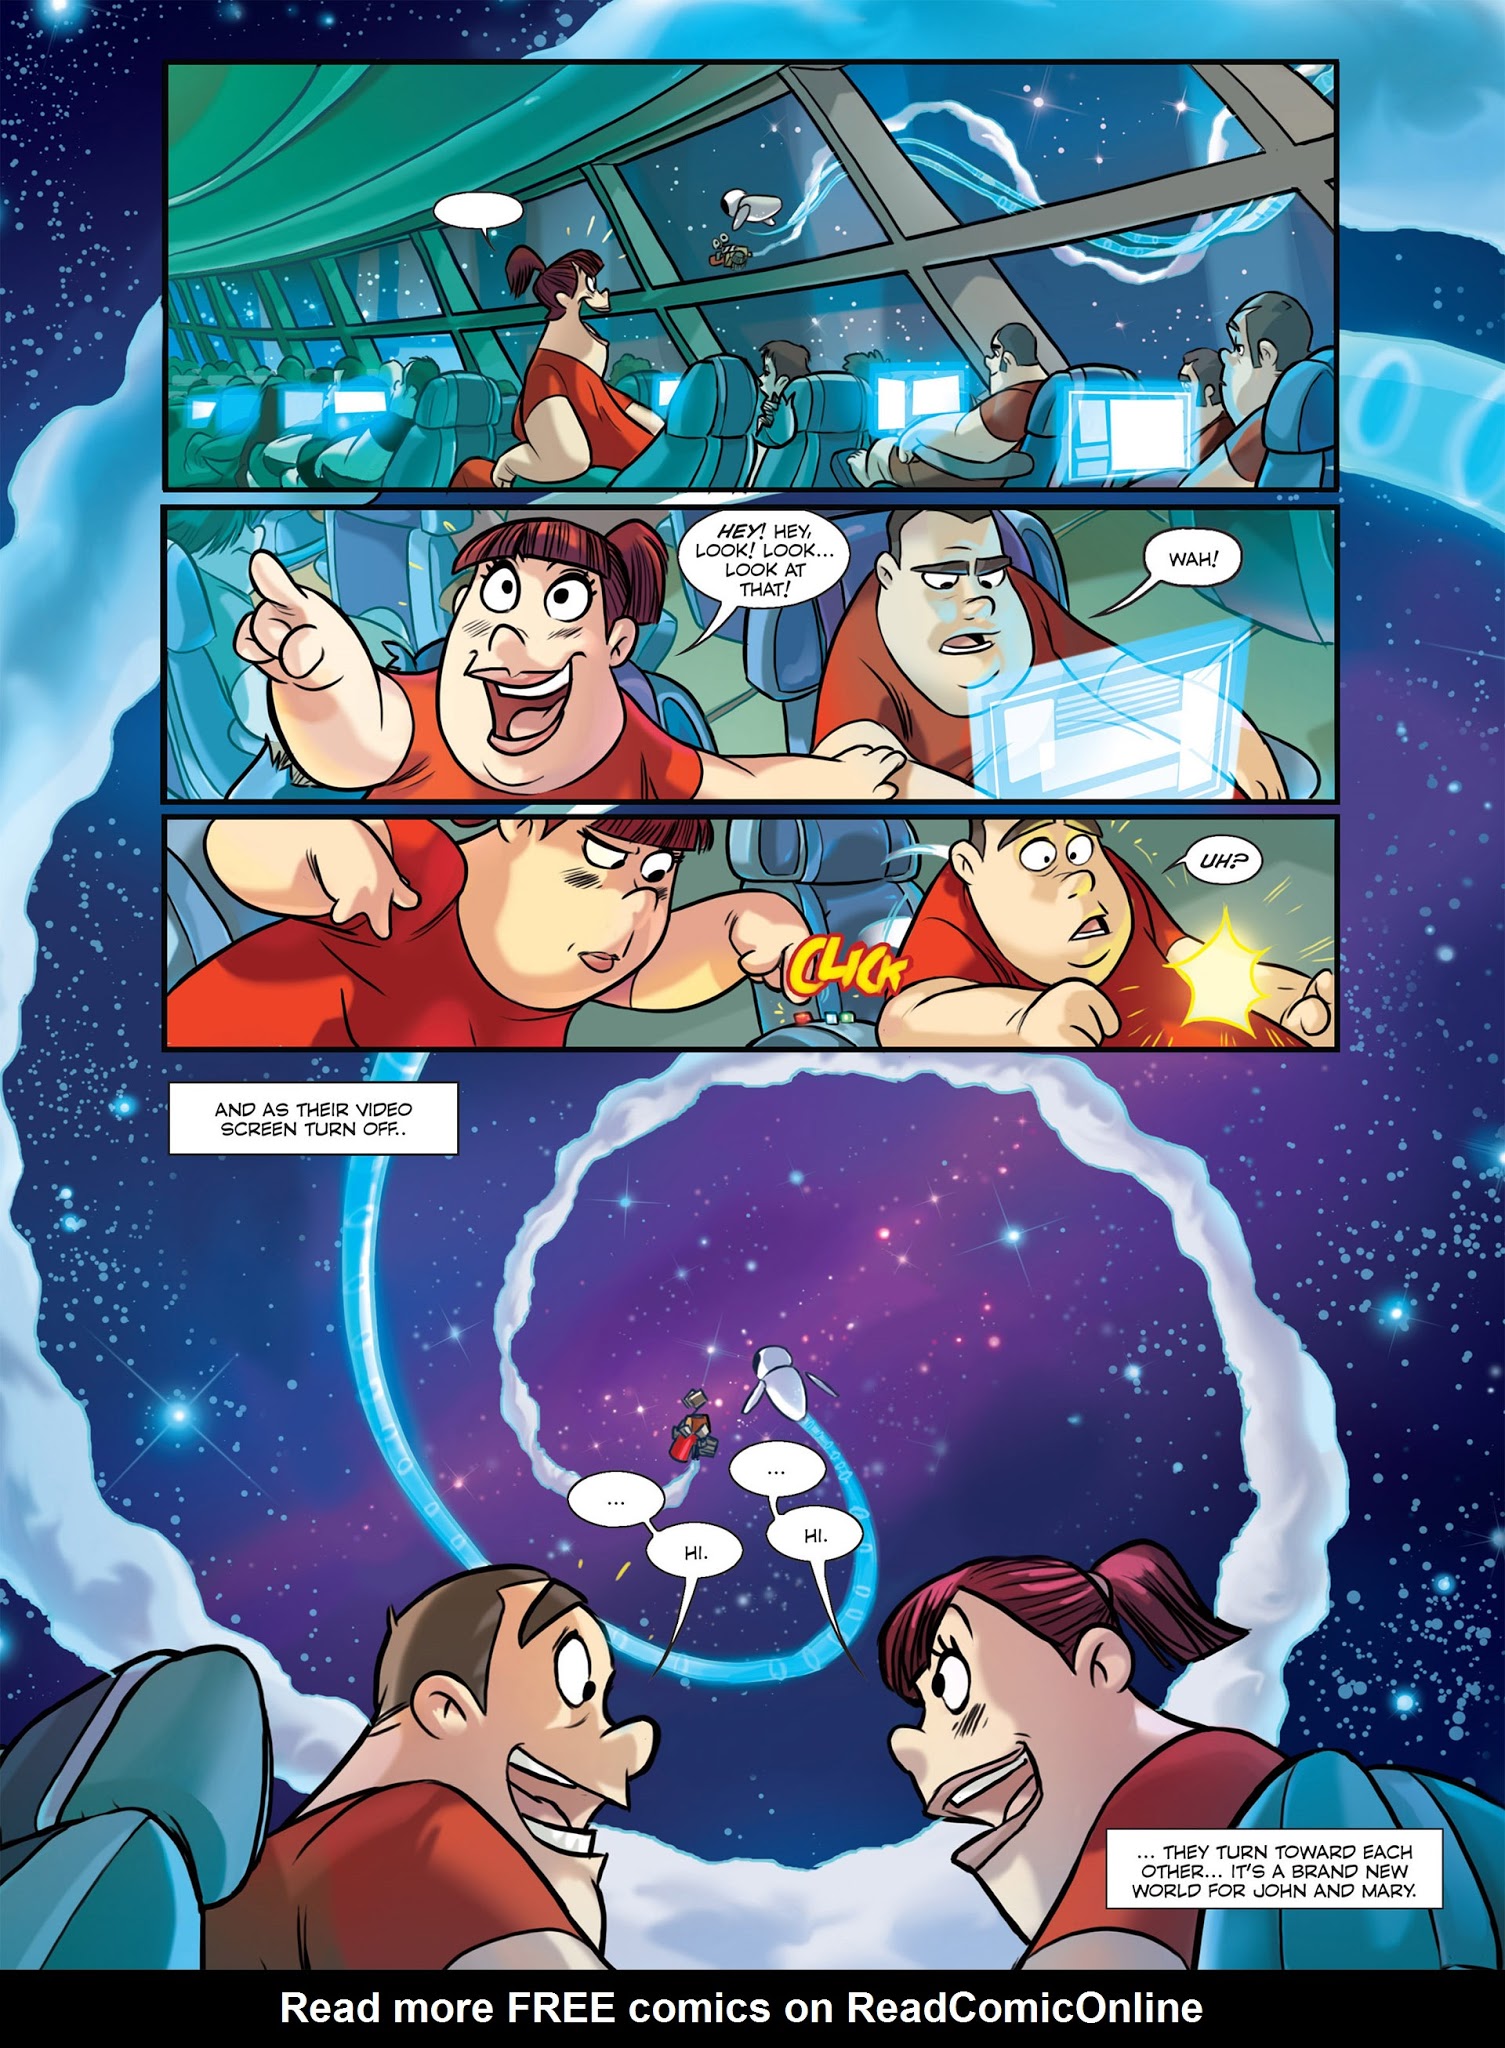 Read online WALL-E comic -  Issue # Full - 30